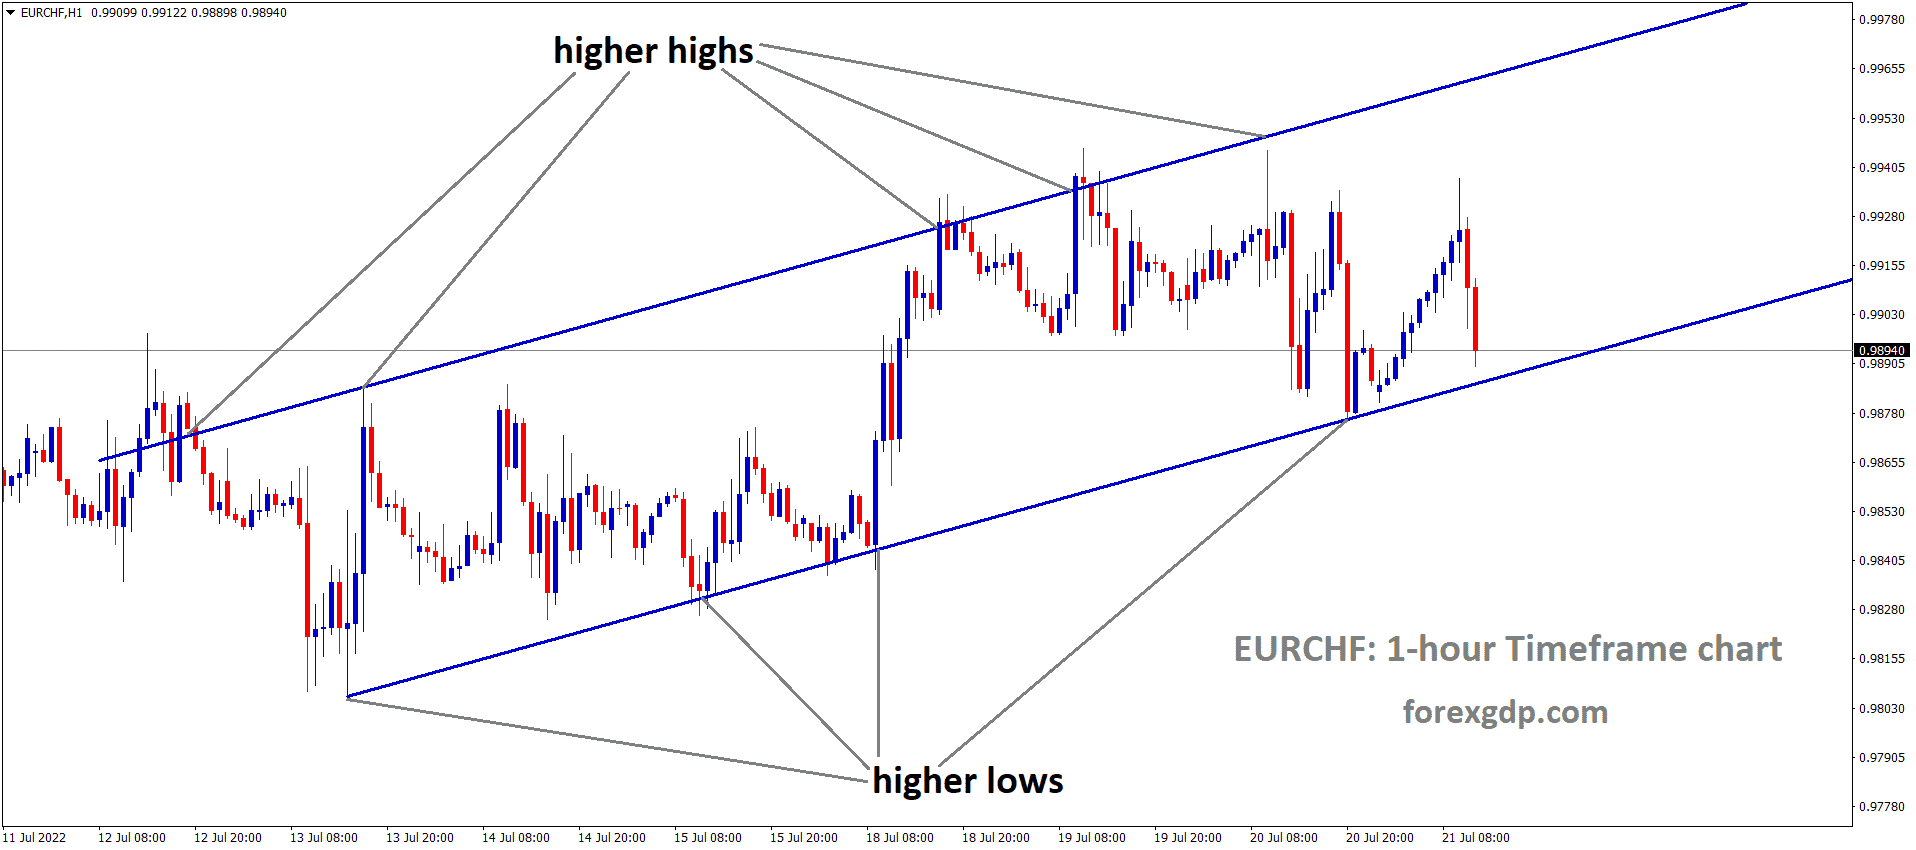 EURCHF is moving in an Ascending channel and the Market has reached the higher low area of the channel